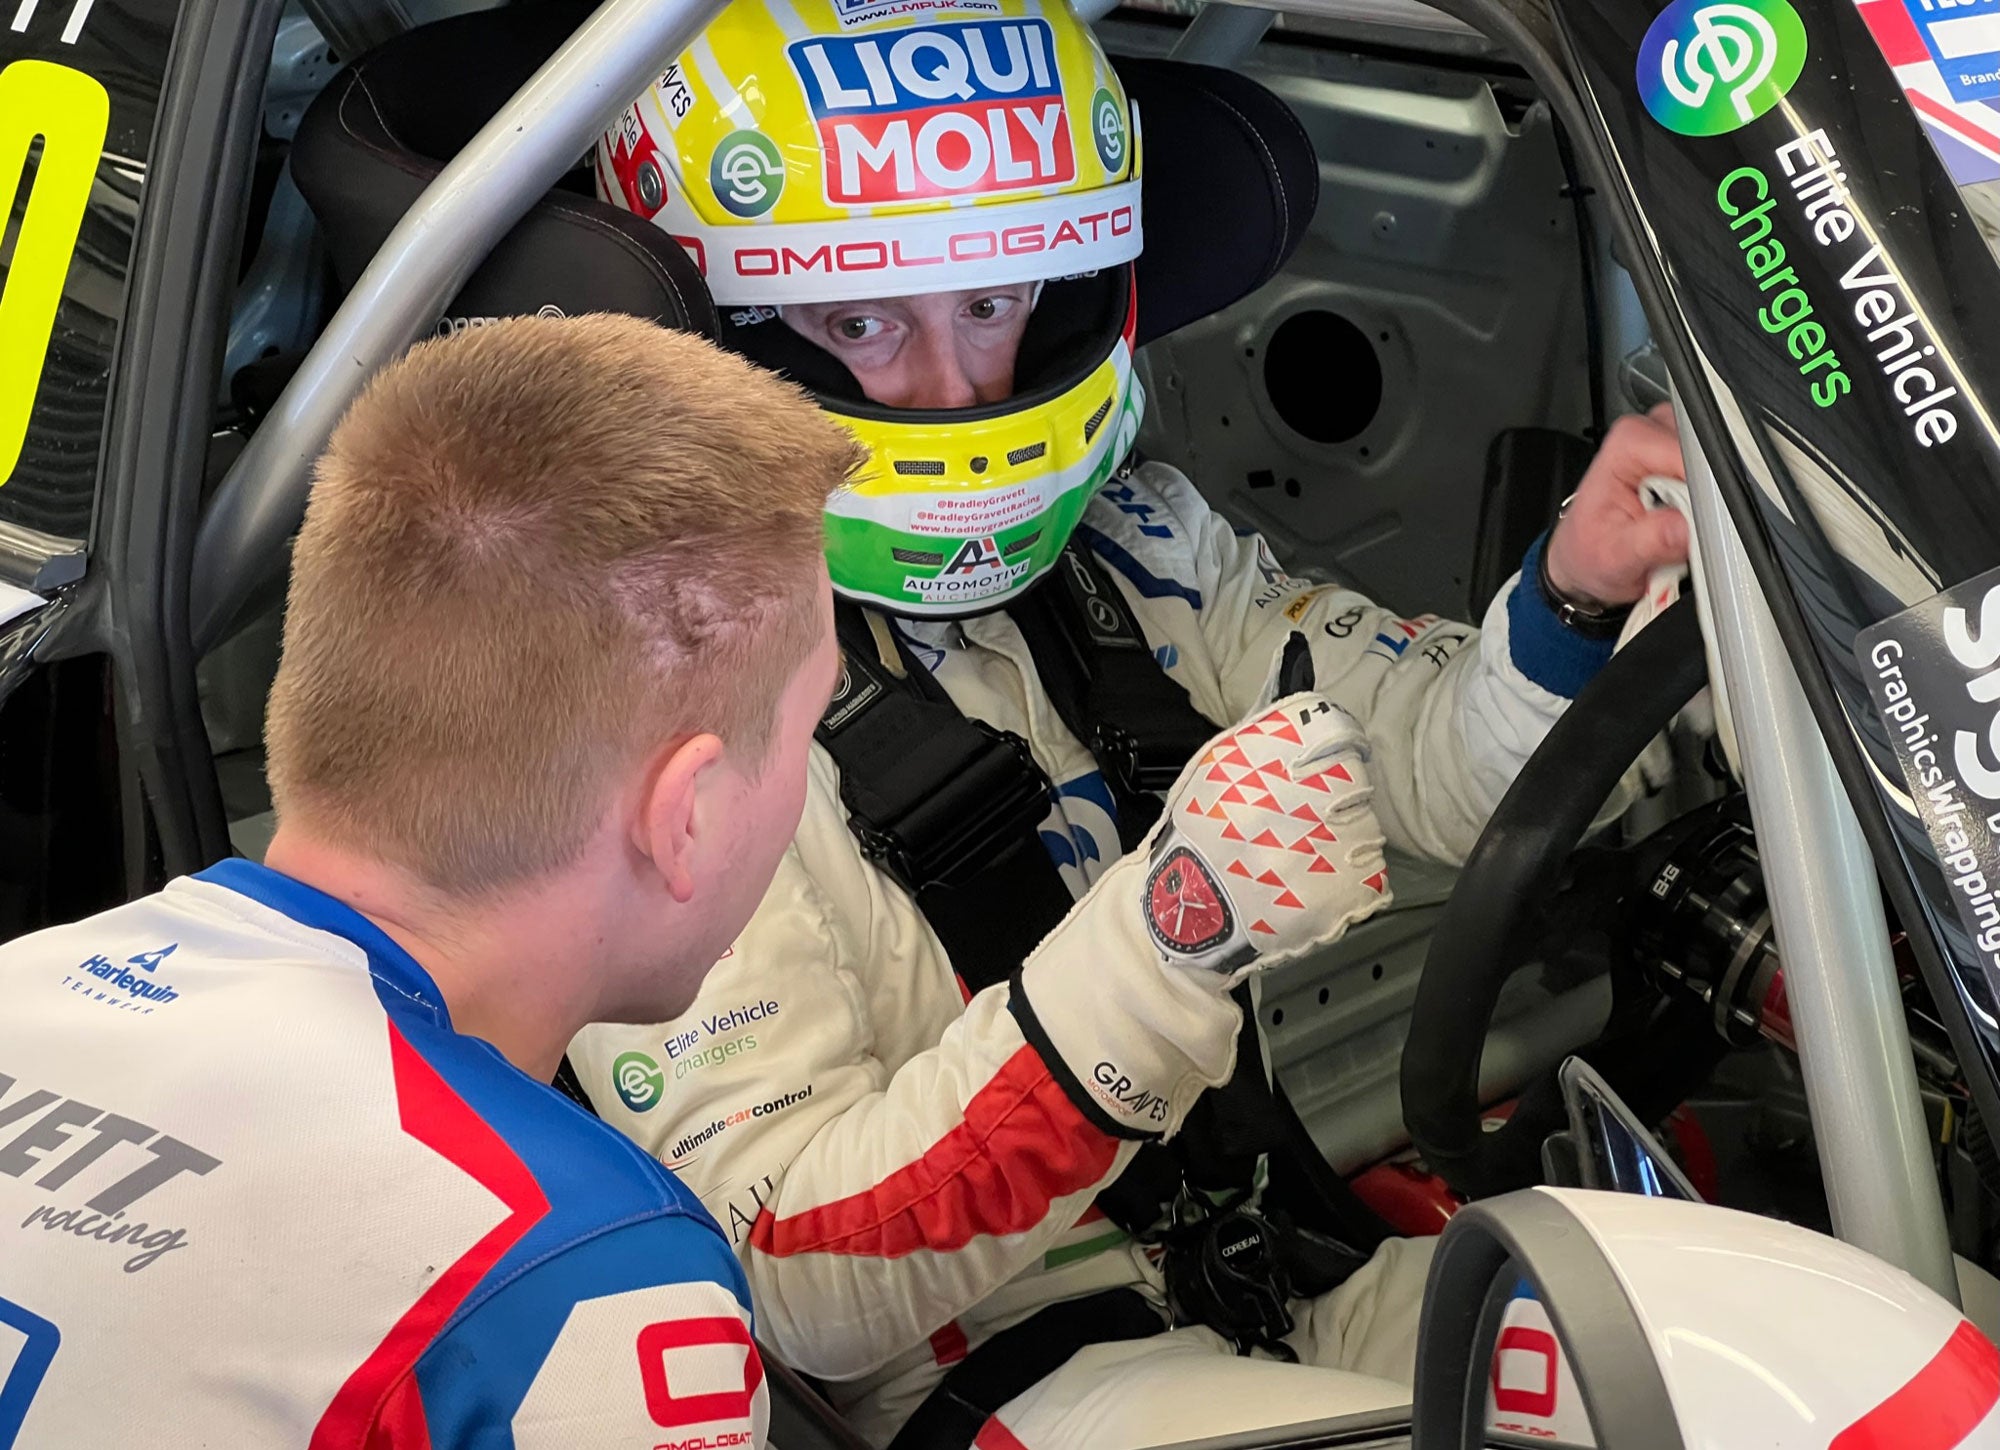 Bradley Gravett son of BTCC British Touring Car Champion Robb Gravett in the MINI Challenge JCW Series at Silverstone National in 2021 The MINI Challenge JCW Race Car Graves Motorsport Cooper Racing Driver LIQUI MOLY LM Performance Thinking it Better